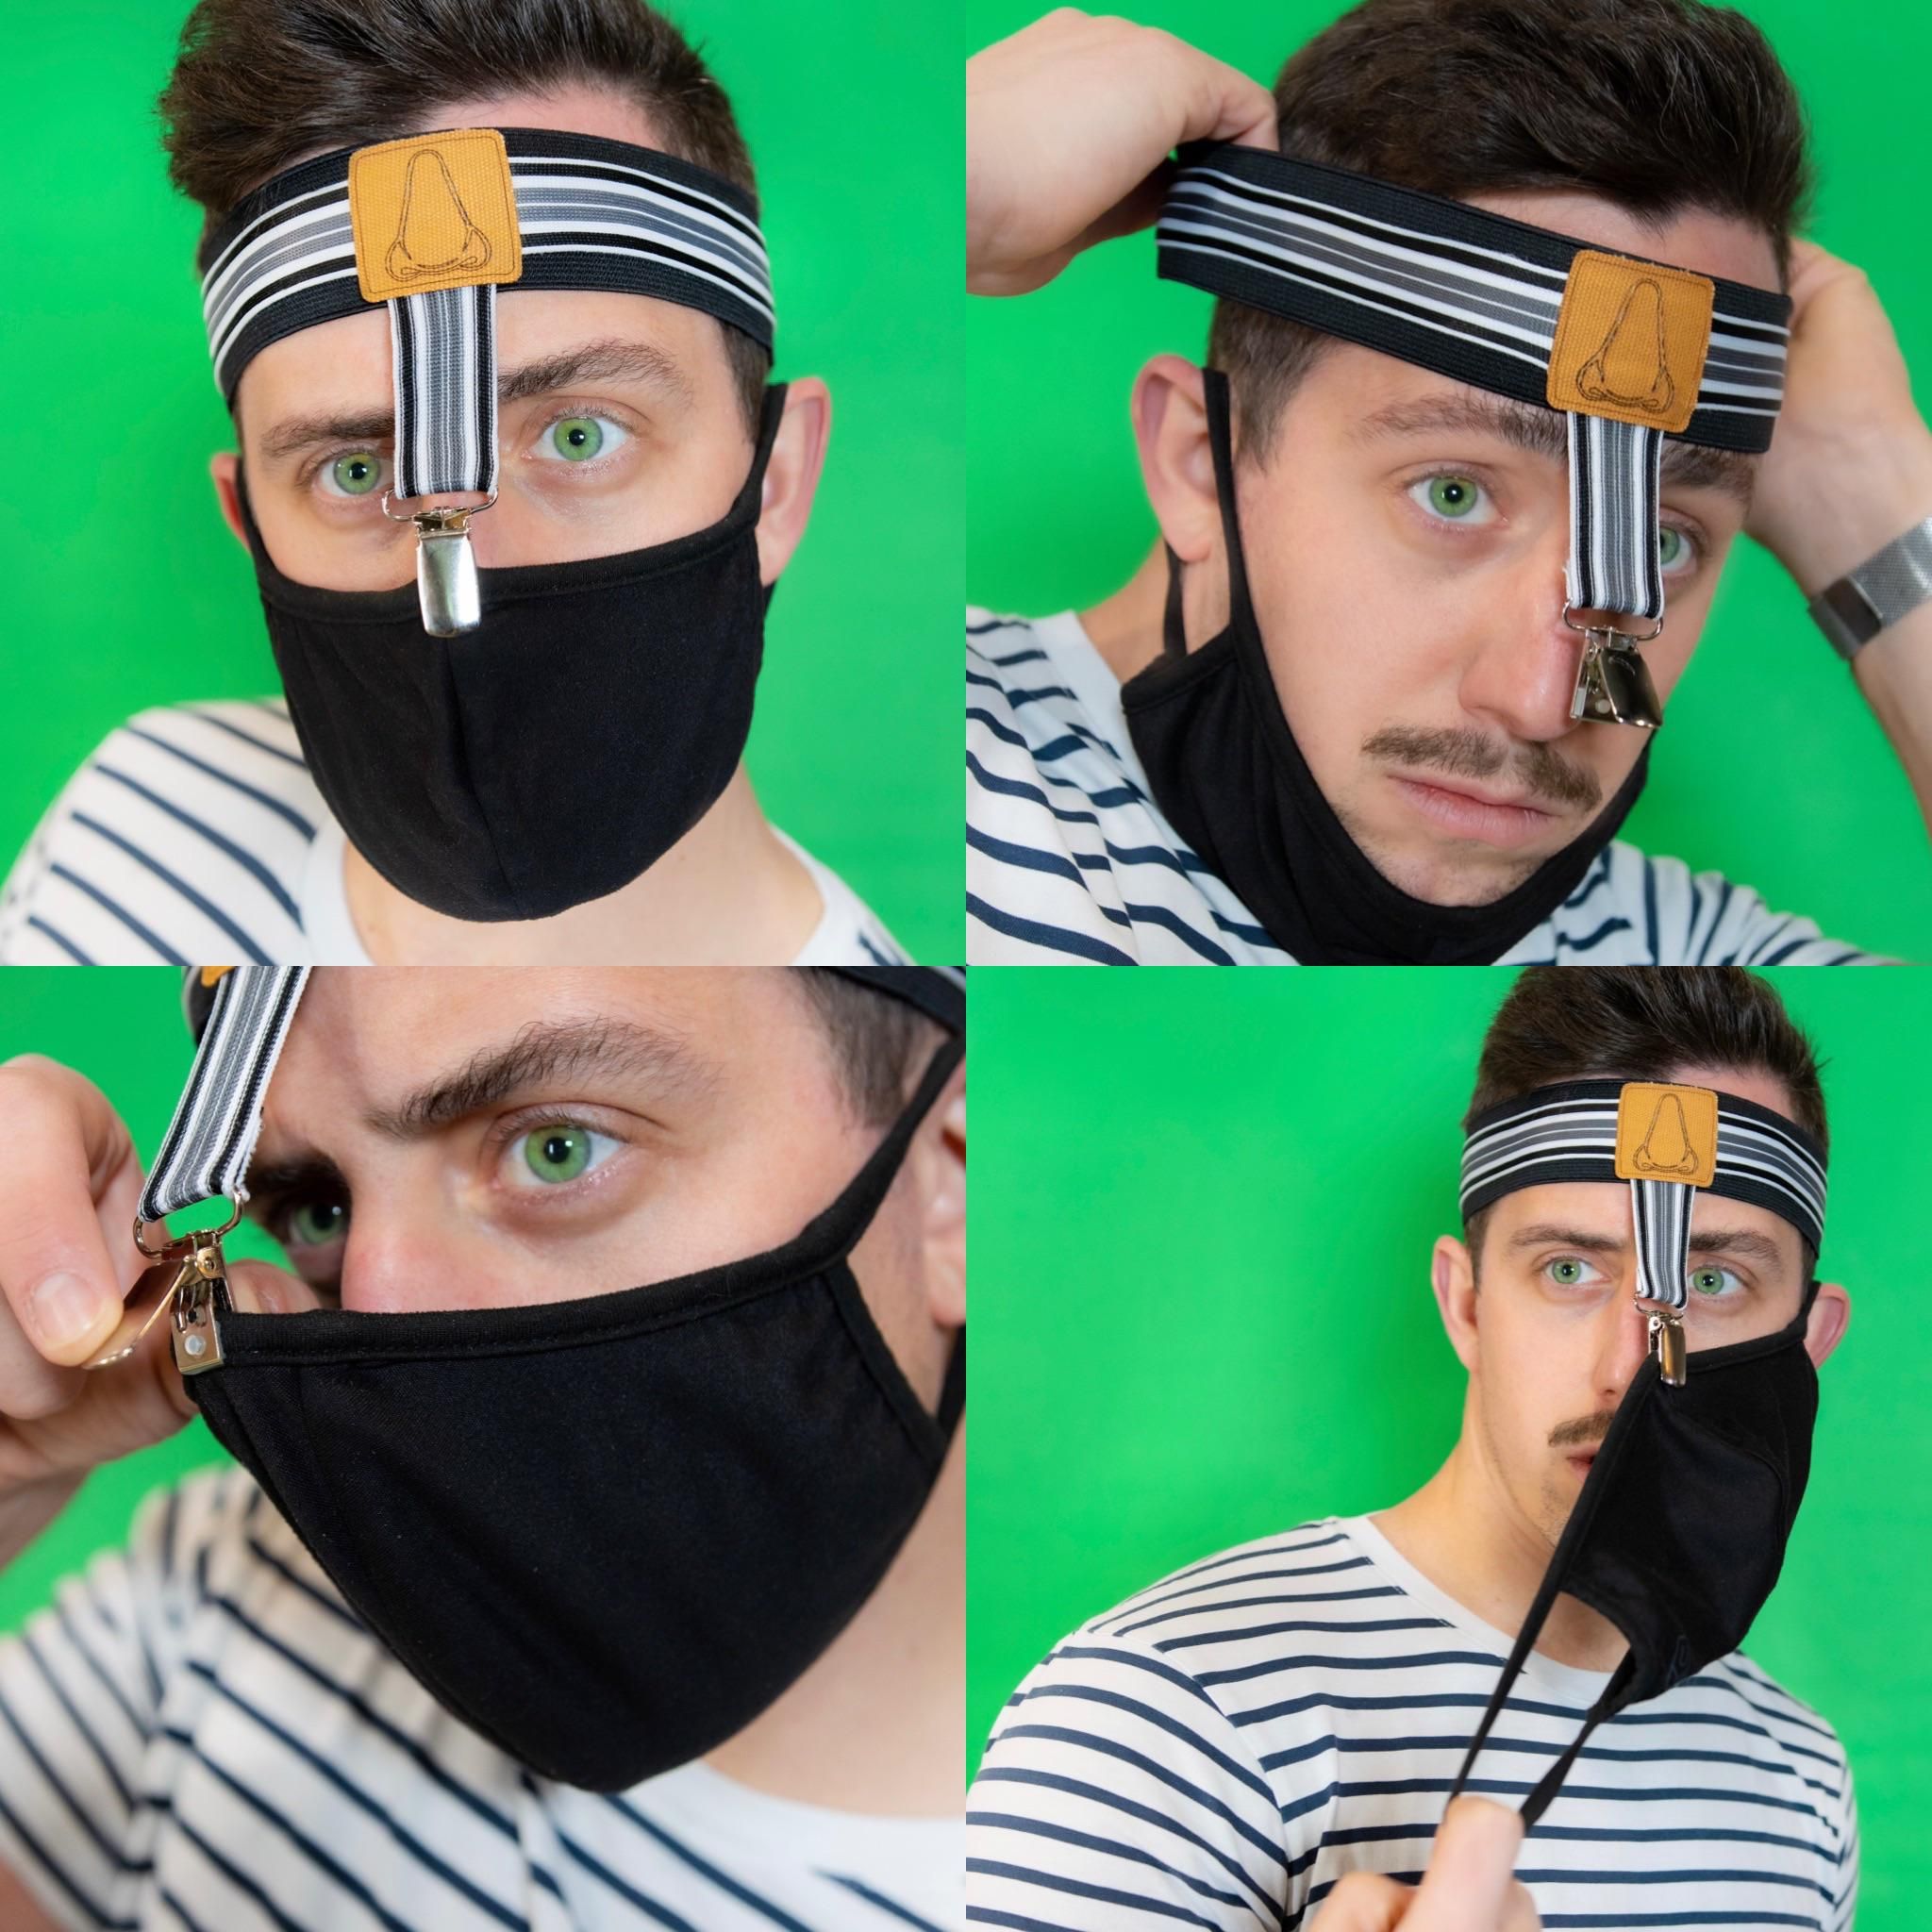 I design absurd product ideas so I created the Mask-Spenders to keep your mask above your nose!